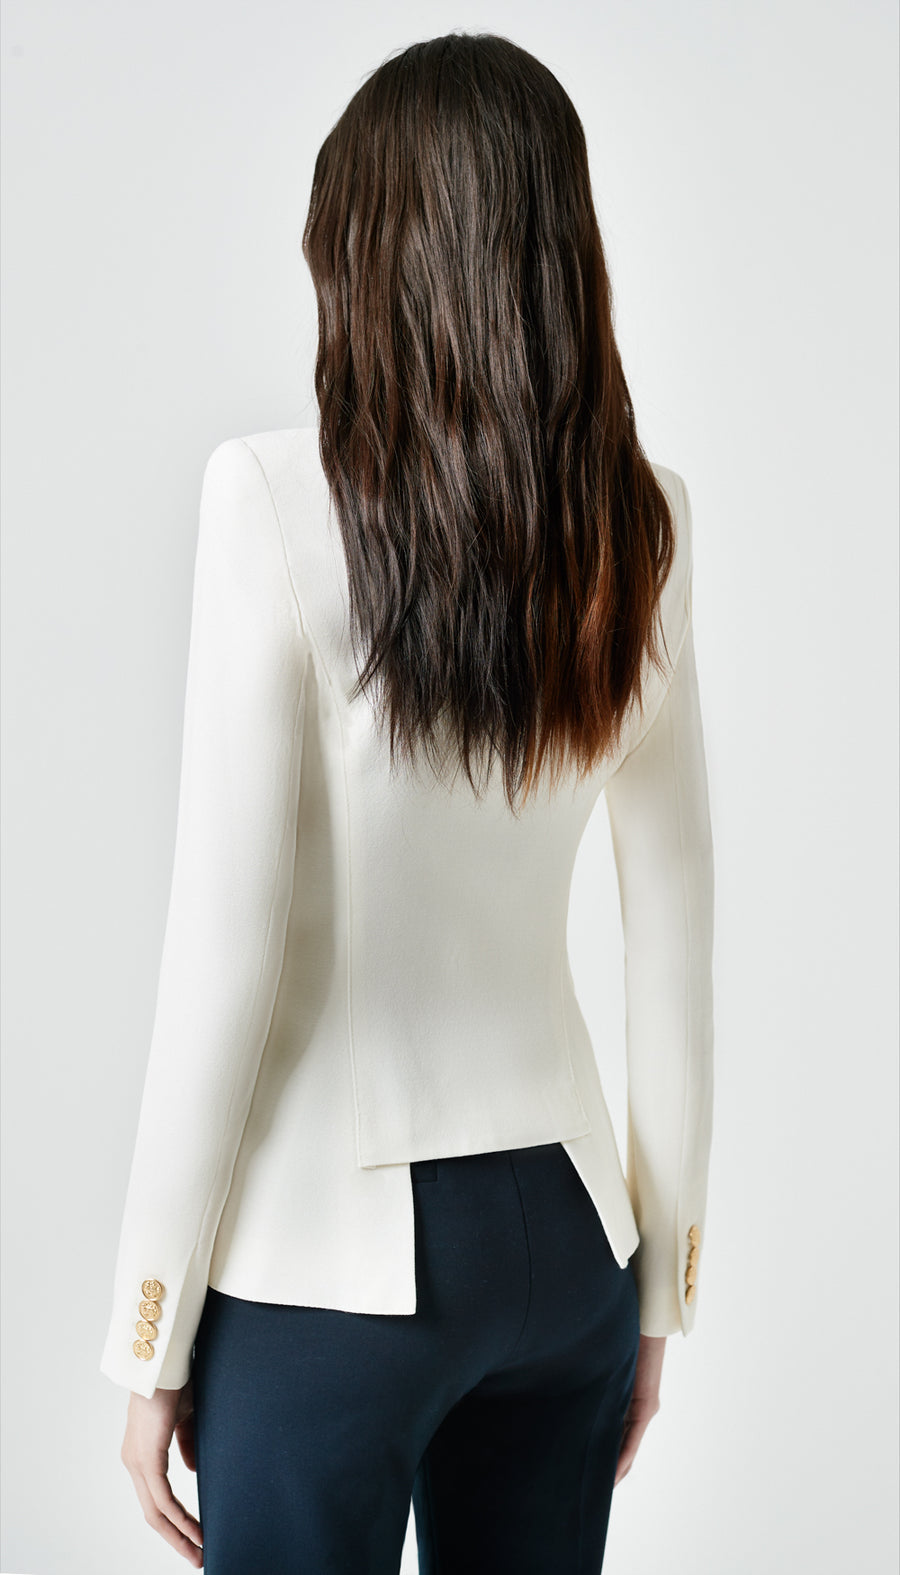 Smythe Duchess Blazer in Ivory available at TNT The New Trend Australia.